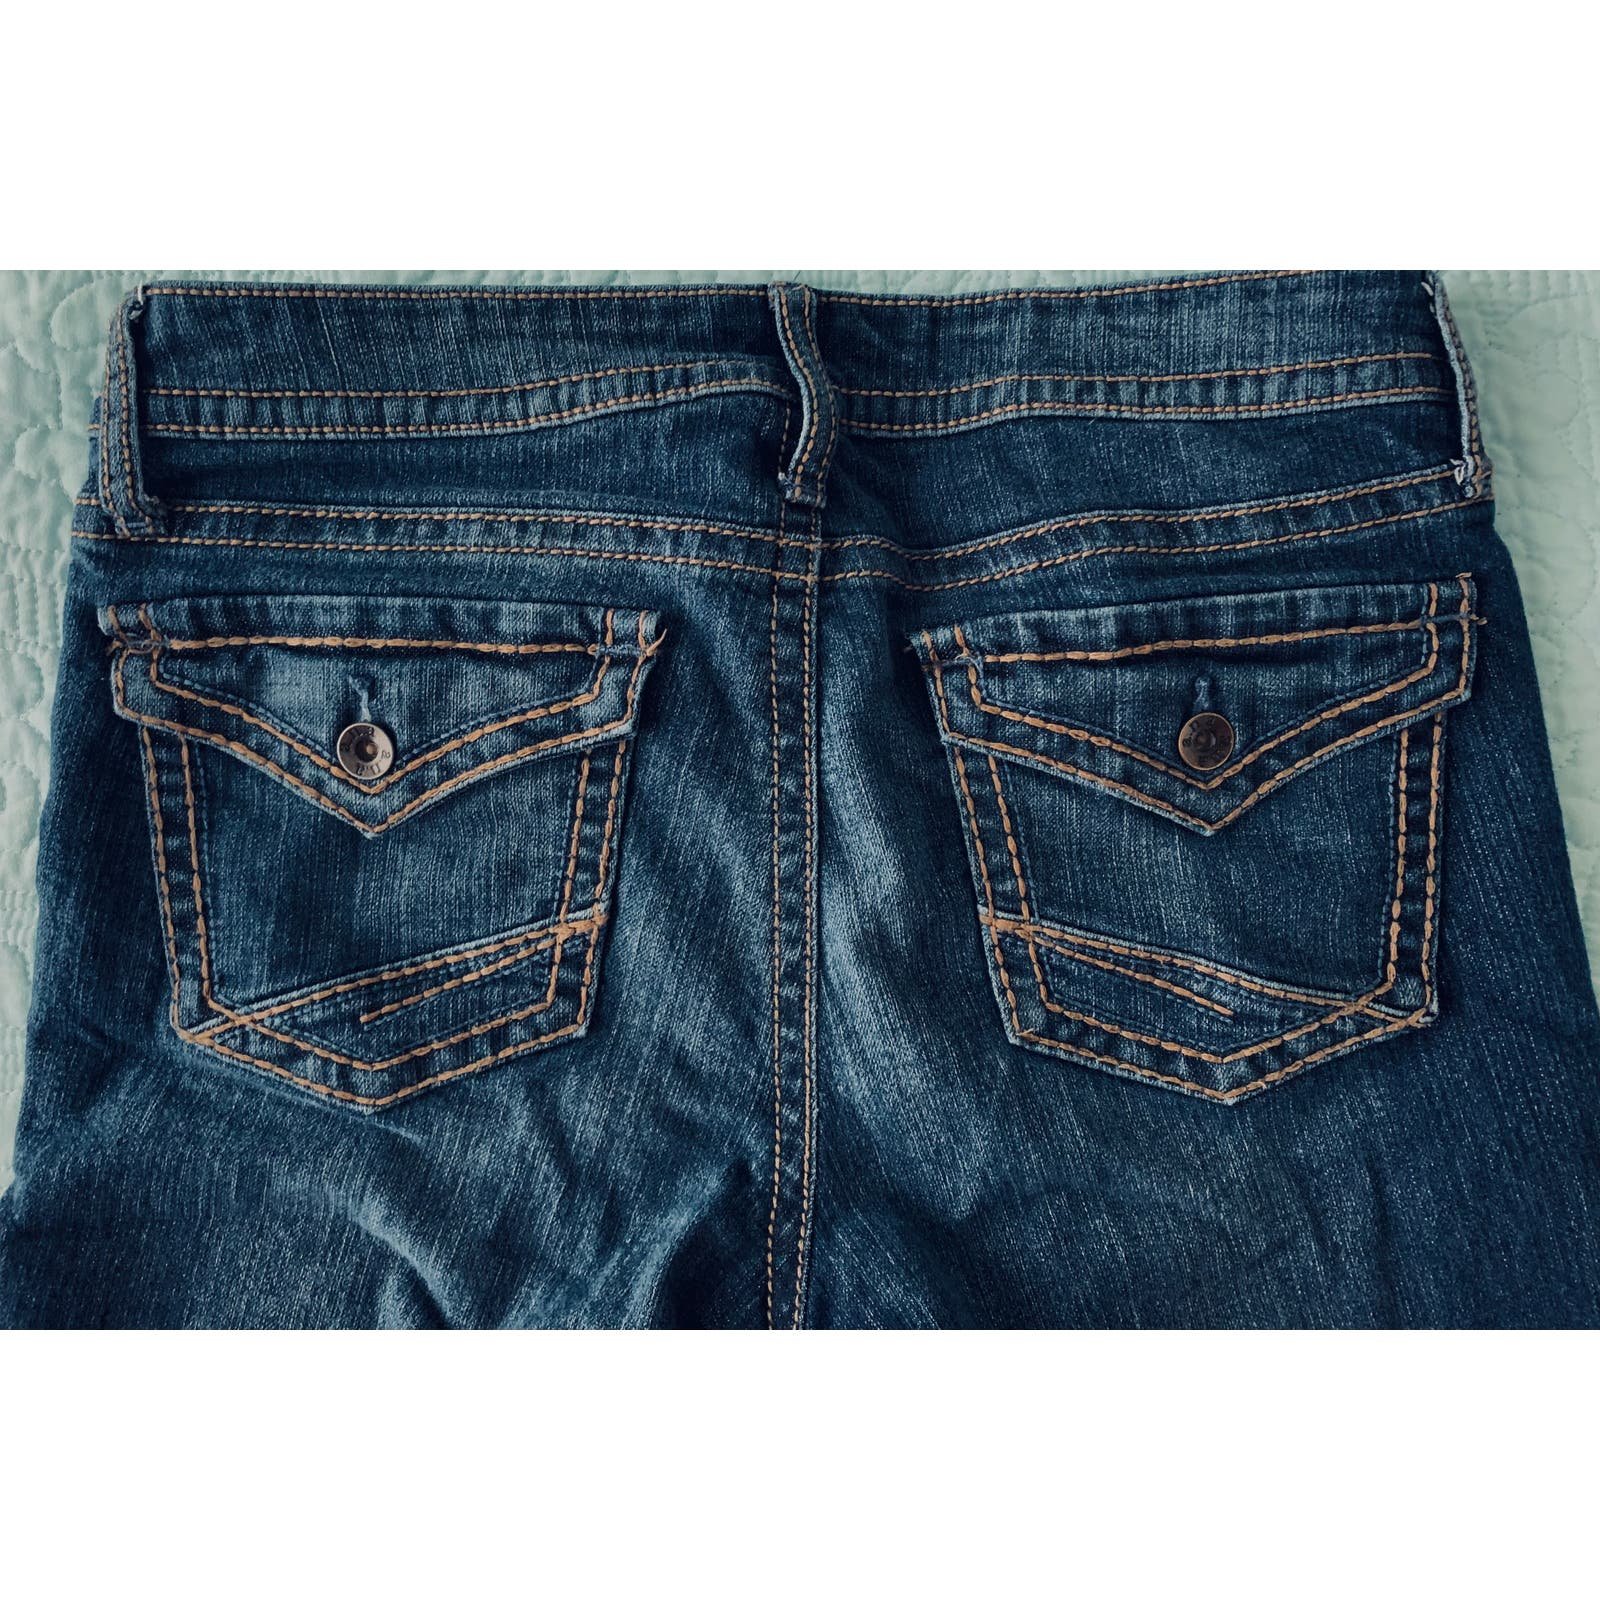 Great A.N.A MID RISE BOOTCUT JEANS WOMENS, 29 / 8, BLUE, WAIST 32 POCKETS FRONT & BACK pFldP65HA on sale